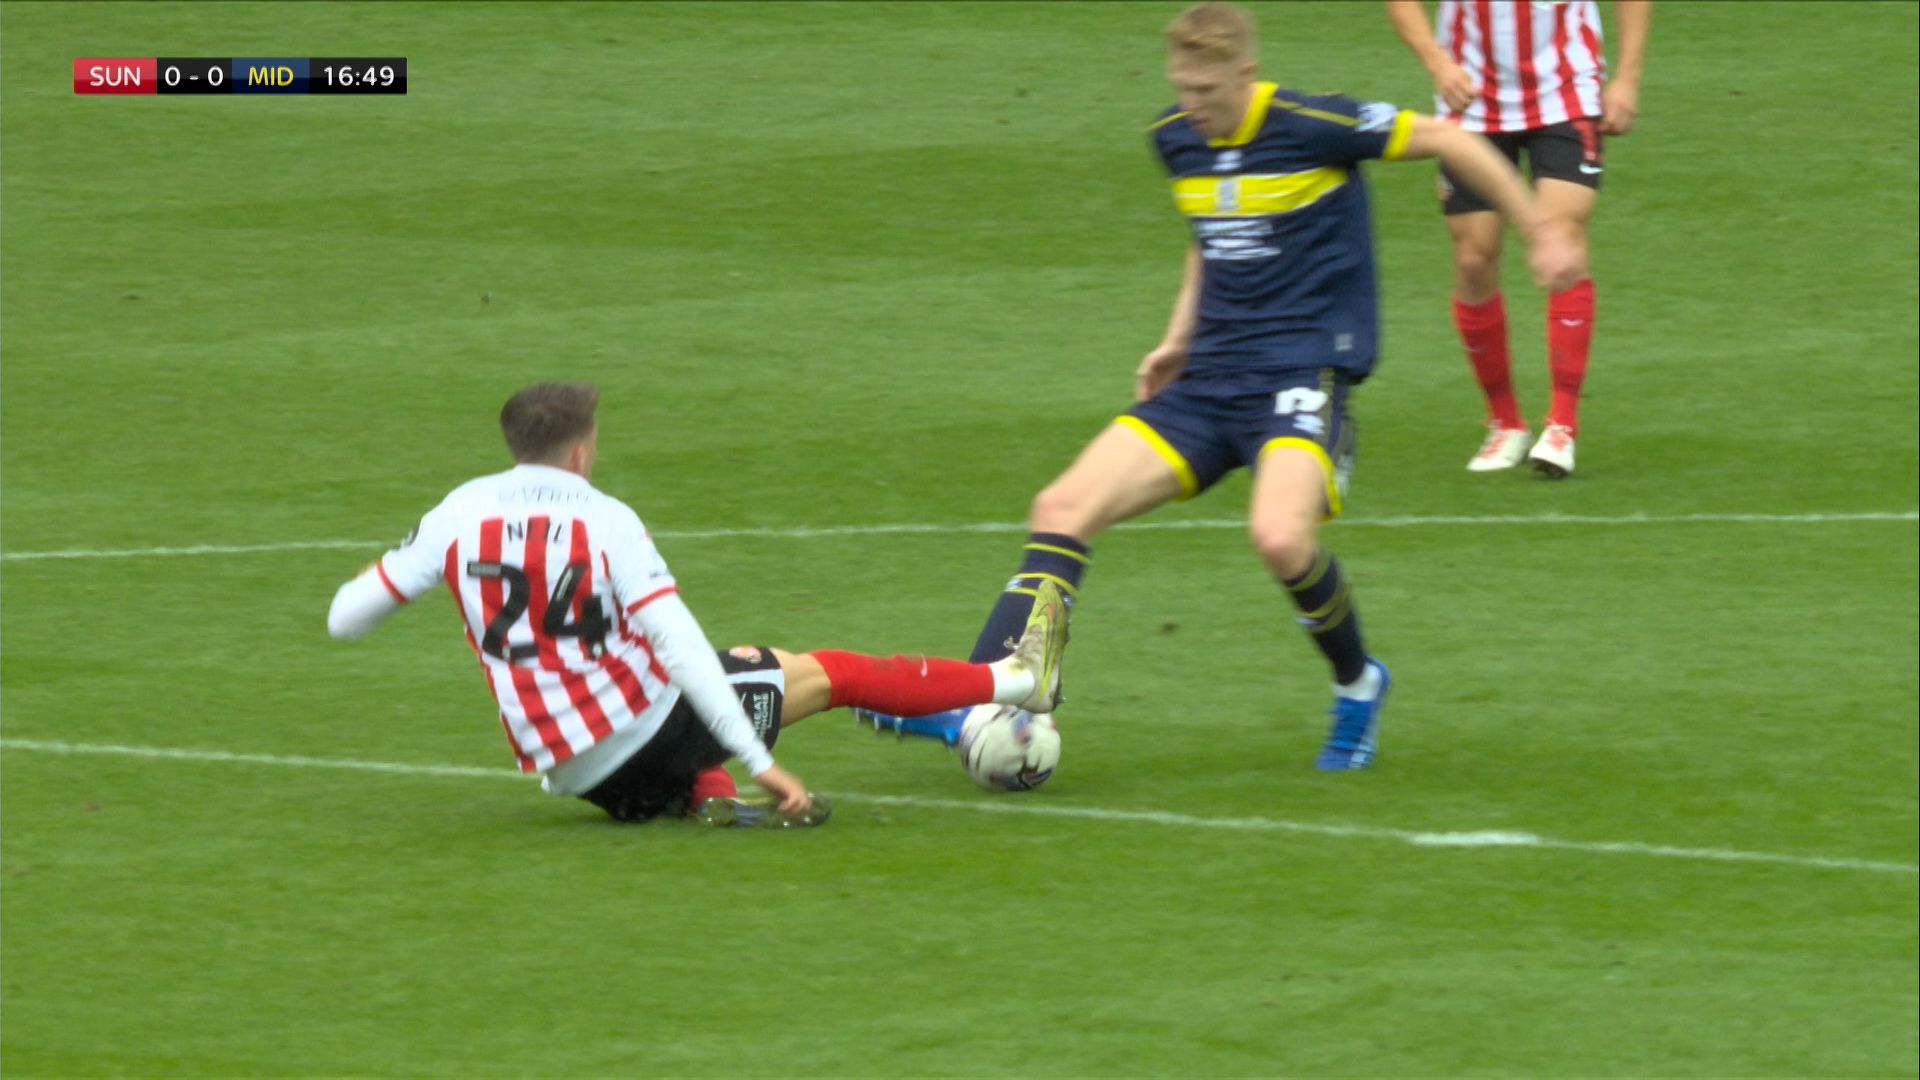 'High and late!' Sunderland lucky to avoid a red card?